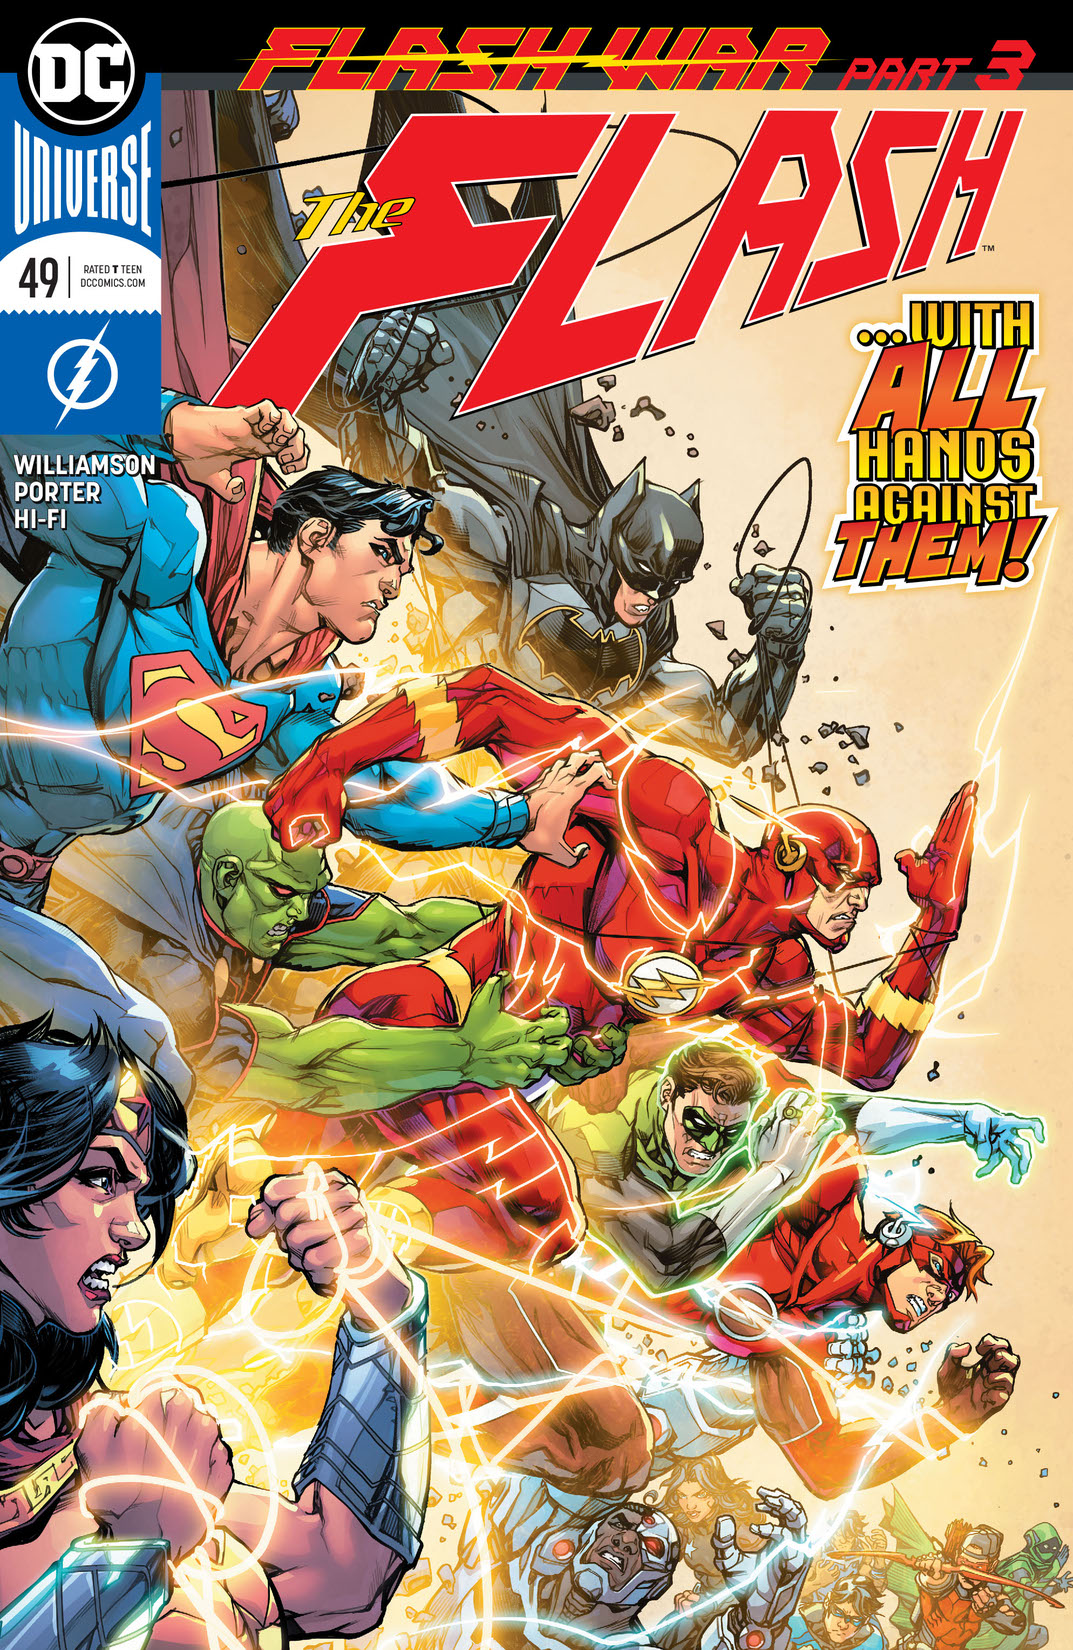 The Flash (2016-) #49 preview images